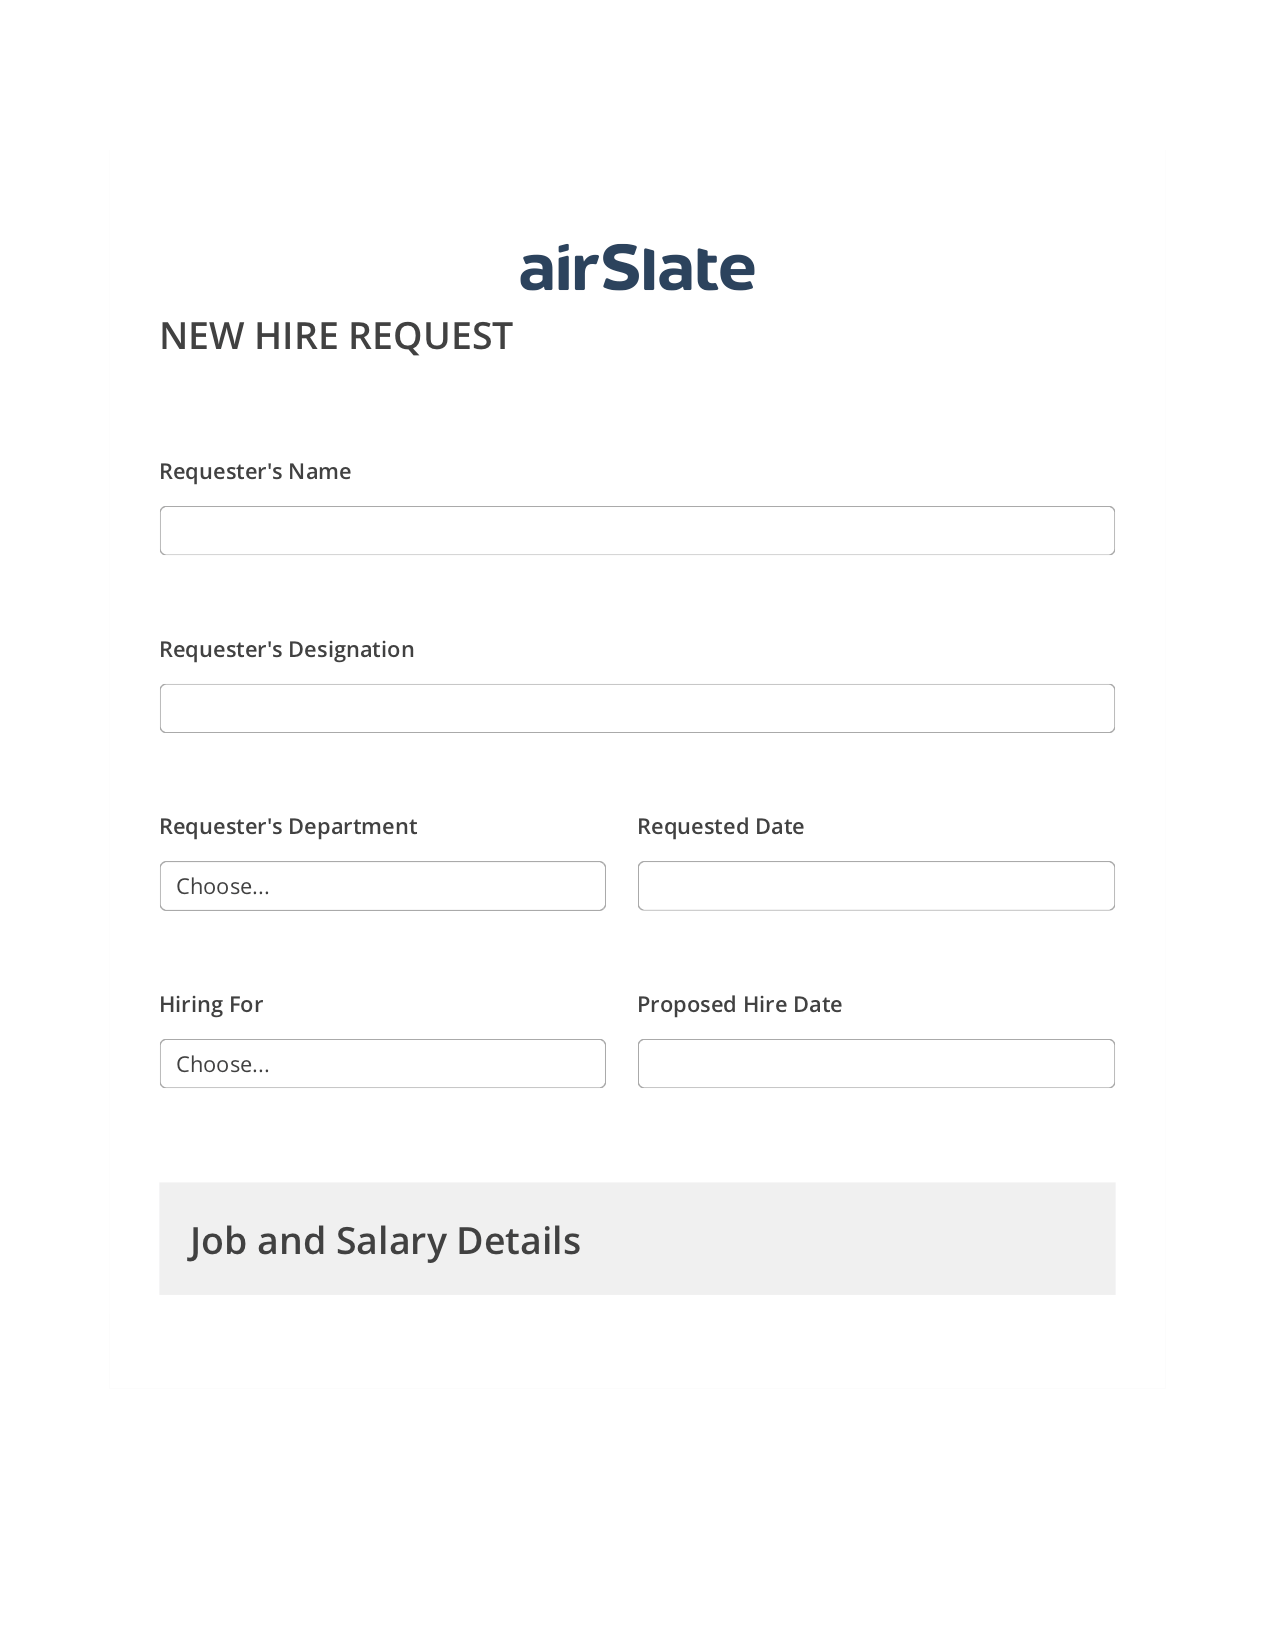 Multirole Hiring Request Workflow Pre-fill from Office 365 Excel Bot, Create slate from another Flow Bot, Export to NetSuite Bot